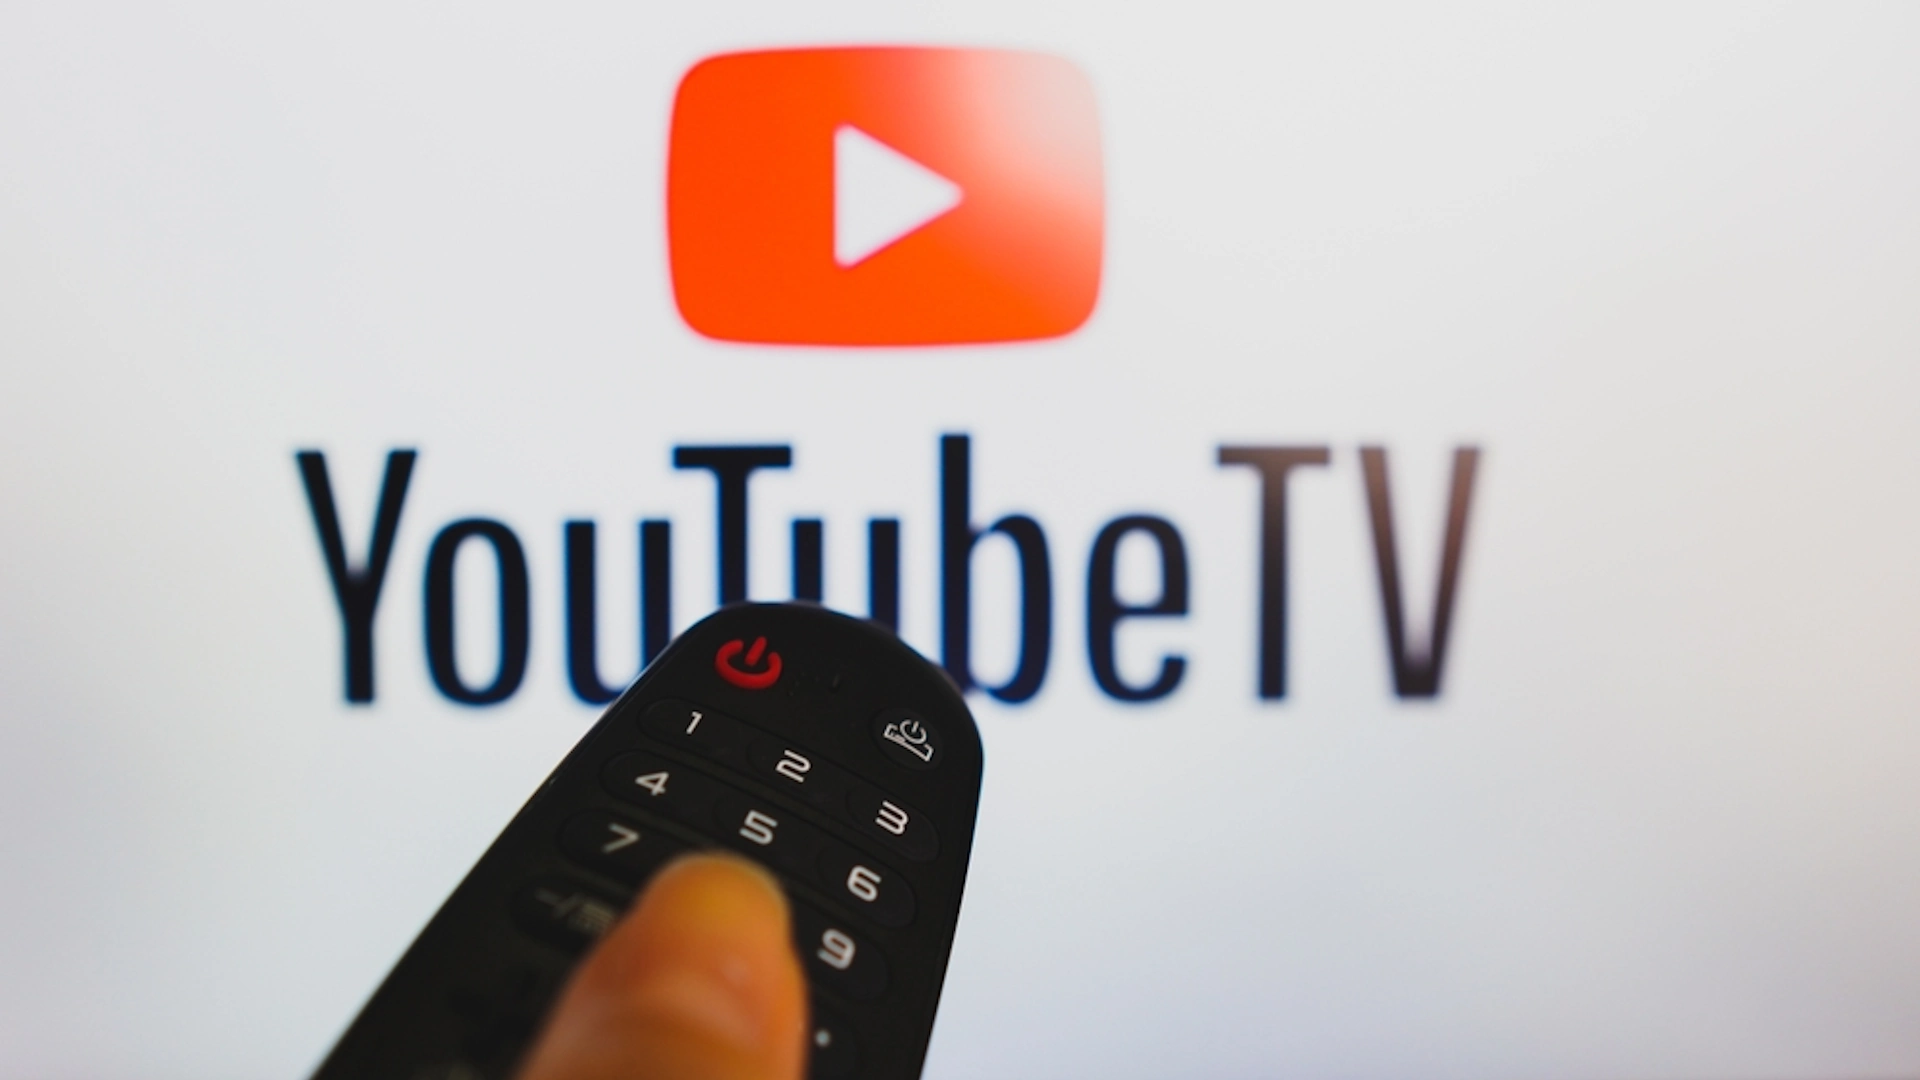 YouTube TV introduces “1080p Enhanced” resolution for improved picture quality